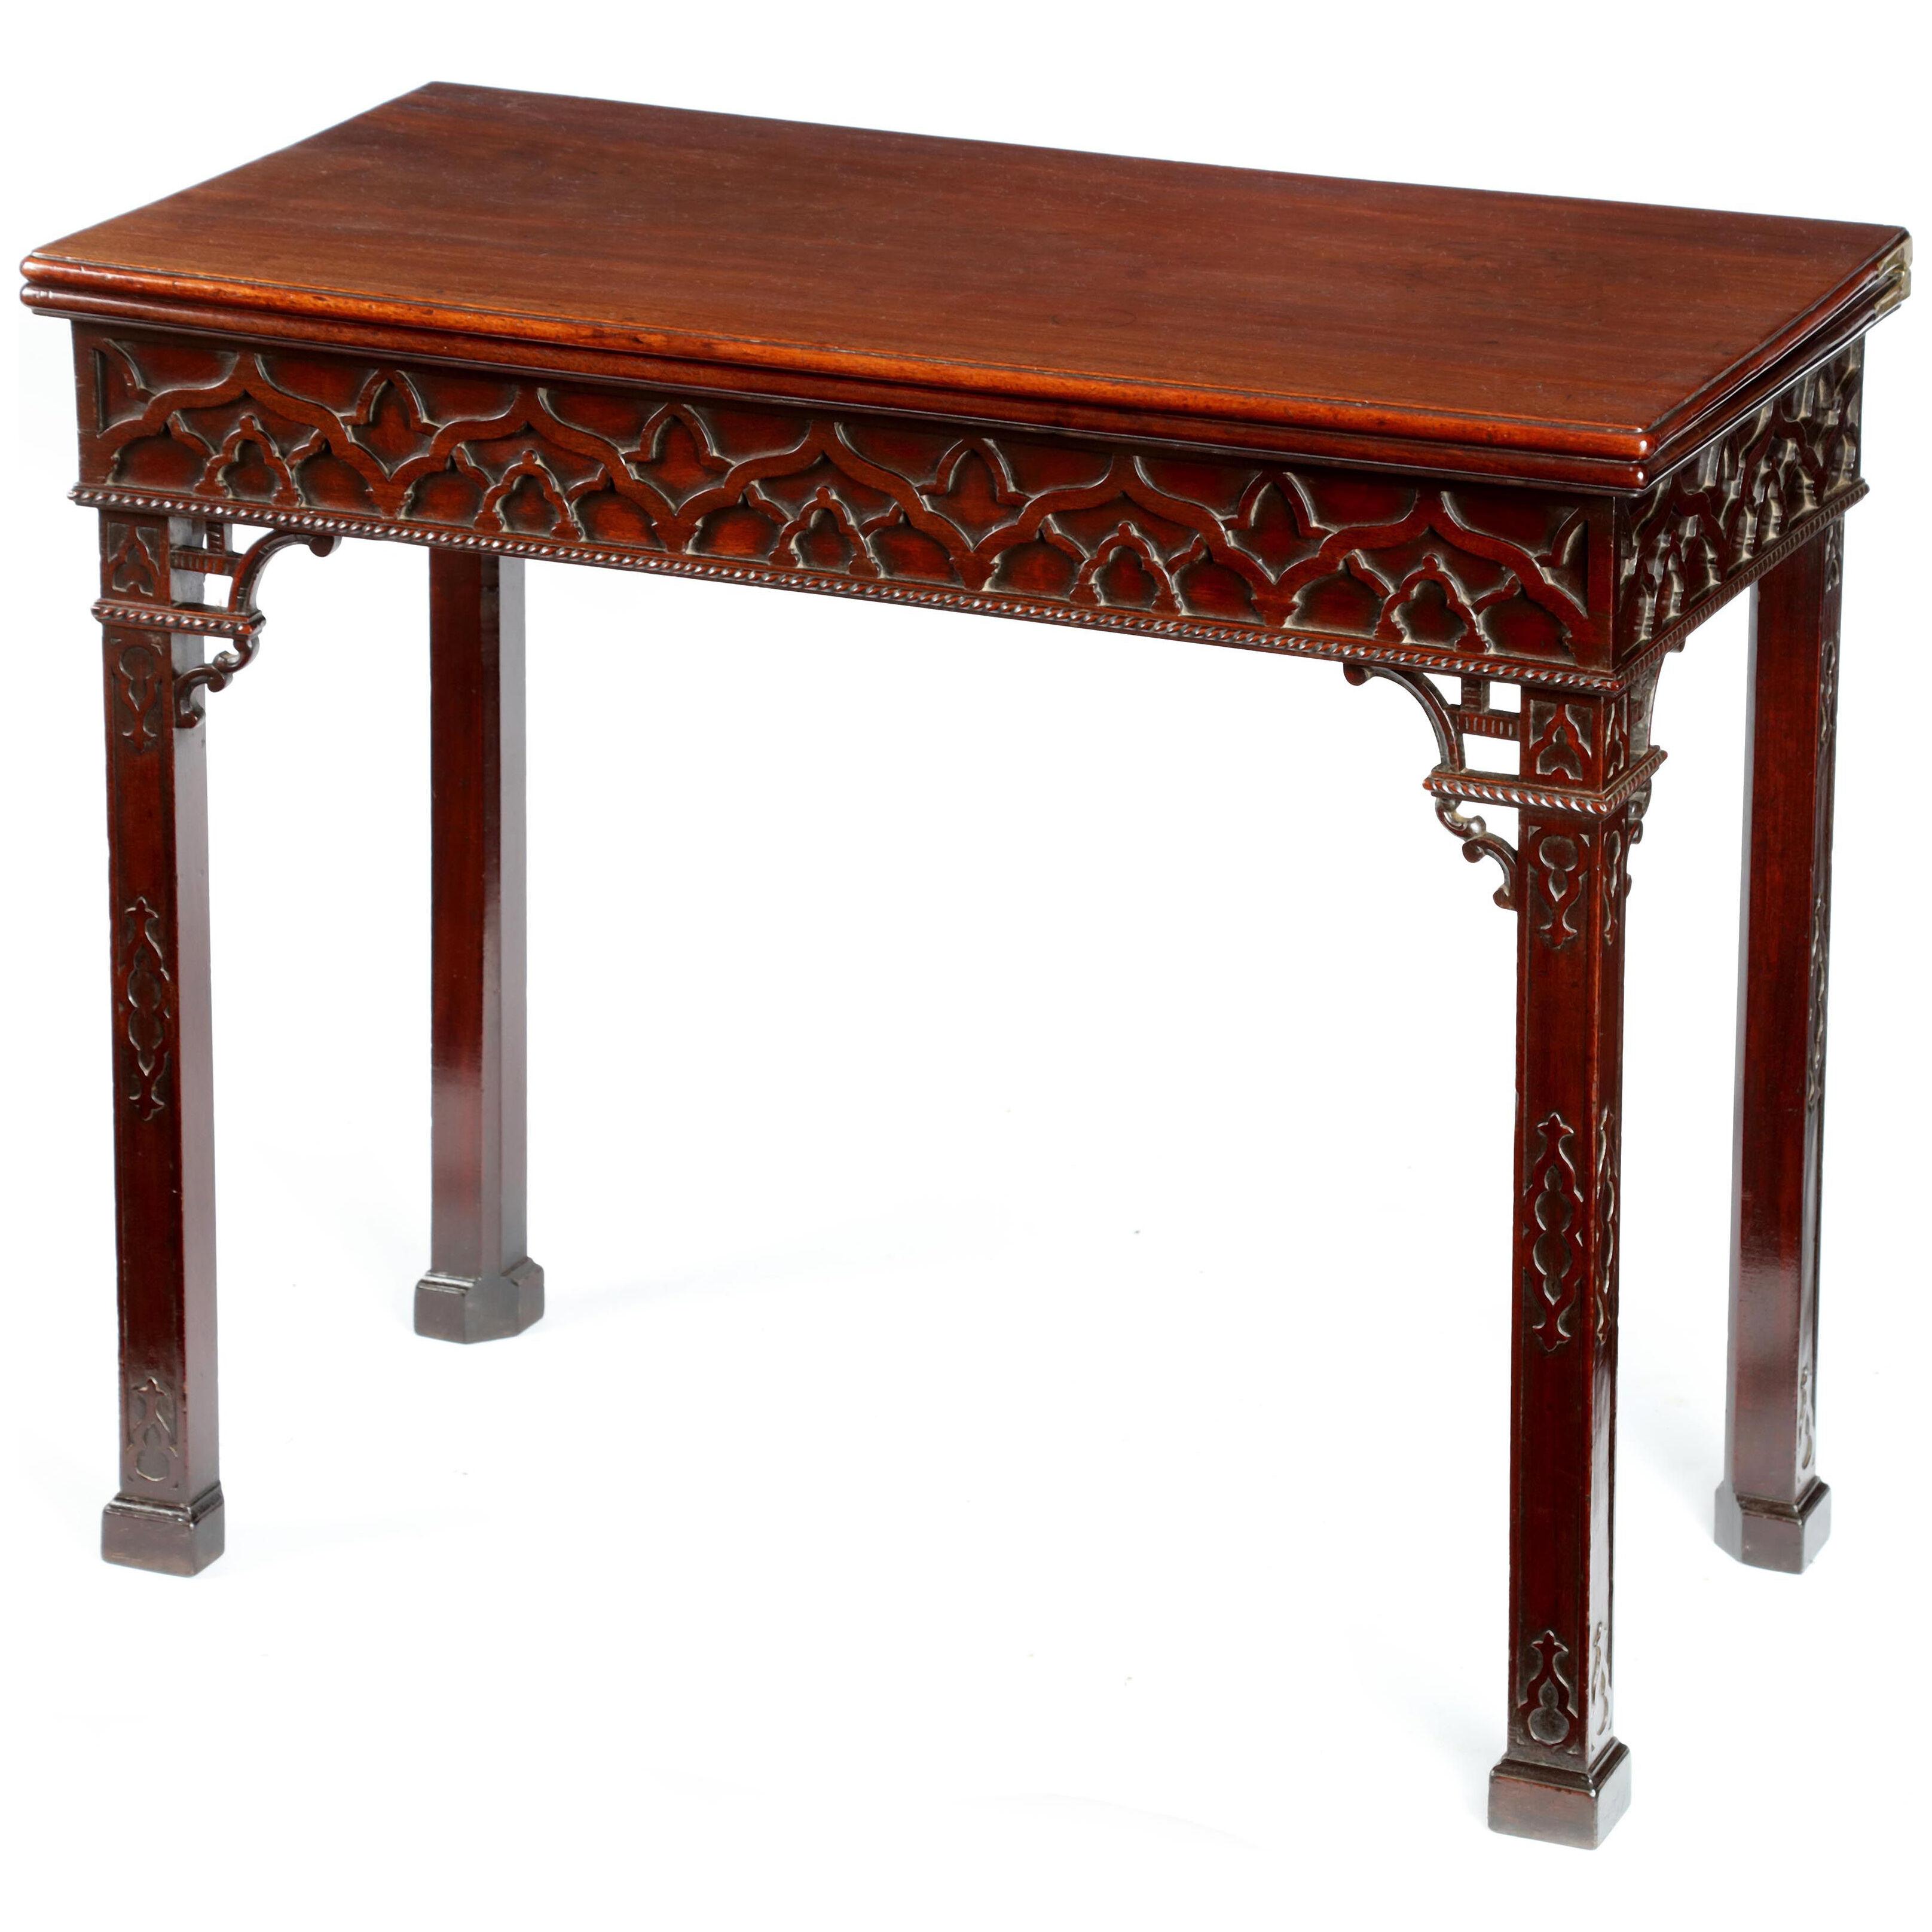 George III Chippendale period carved mahogany fretwork tea table